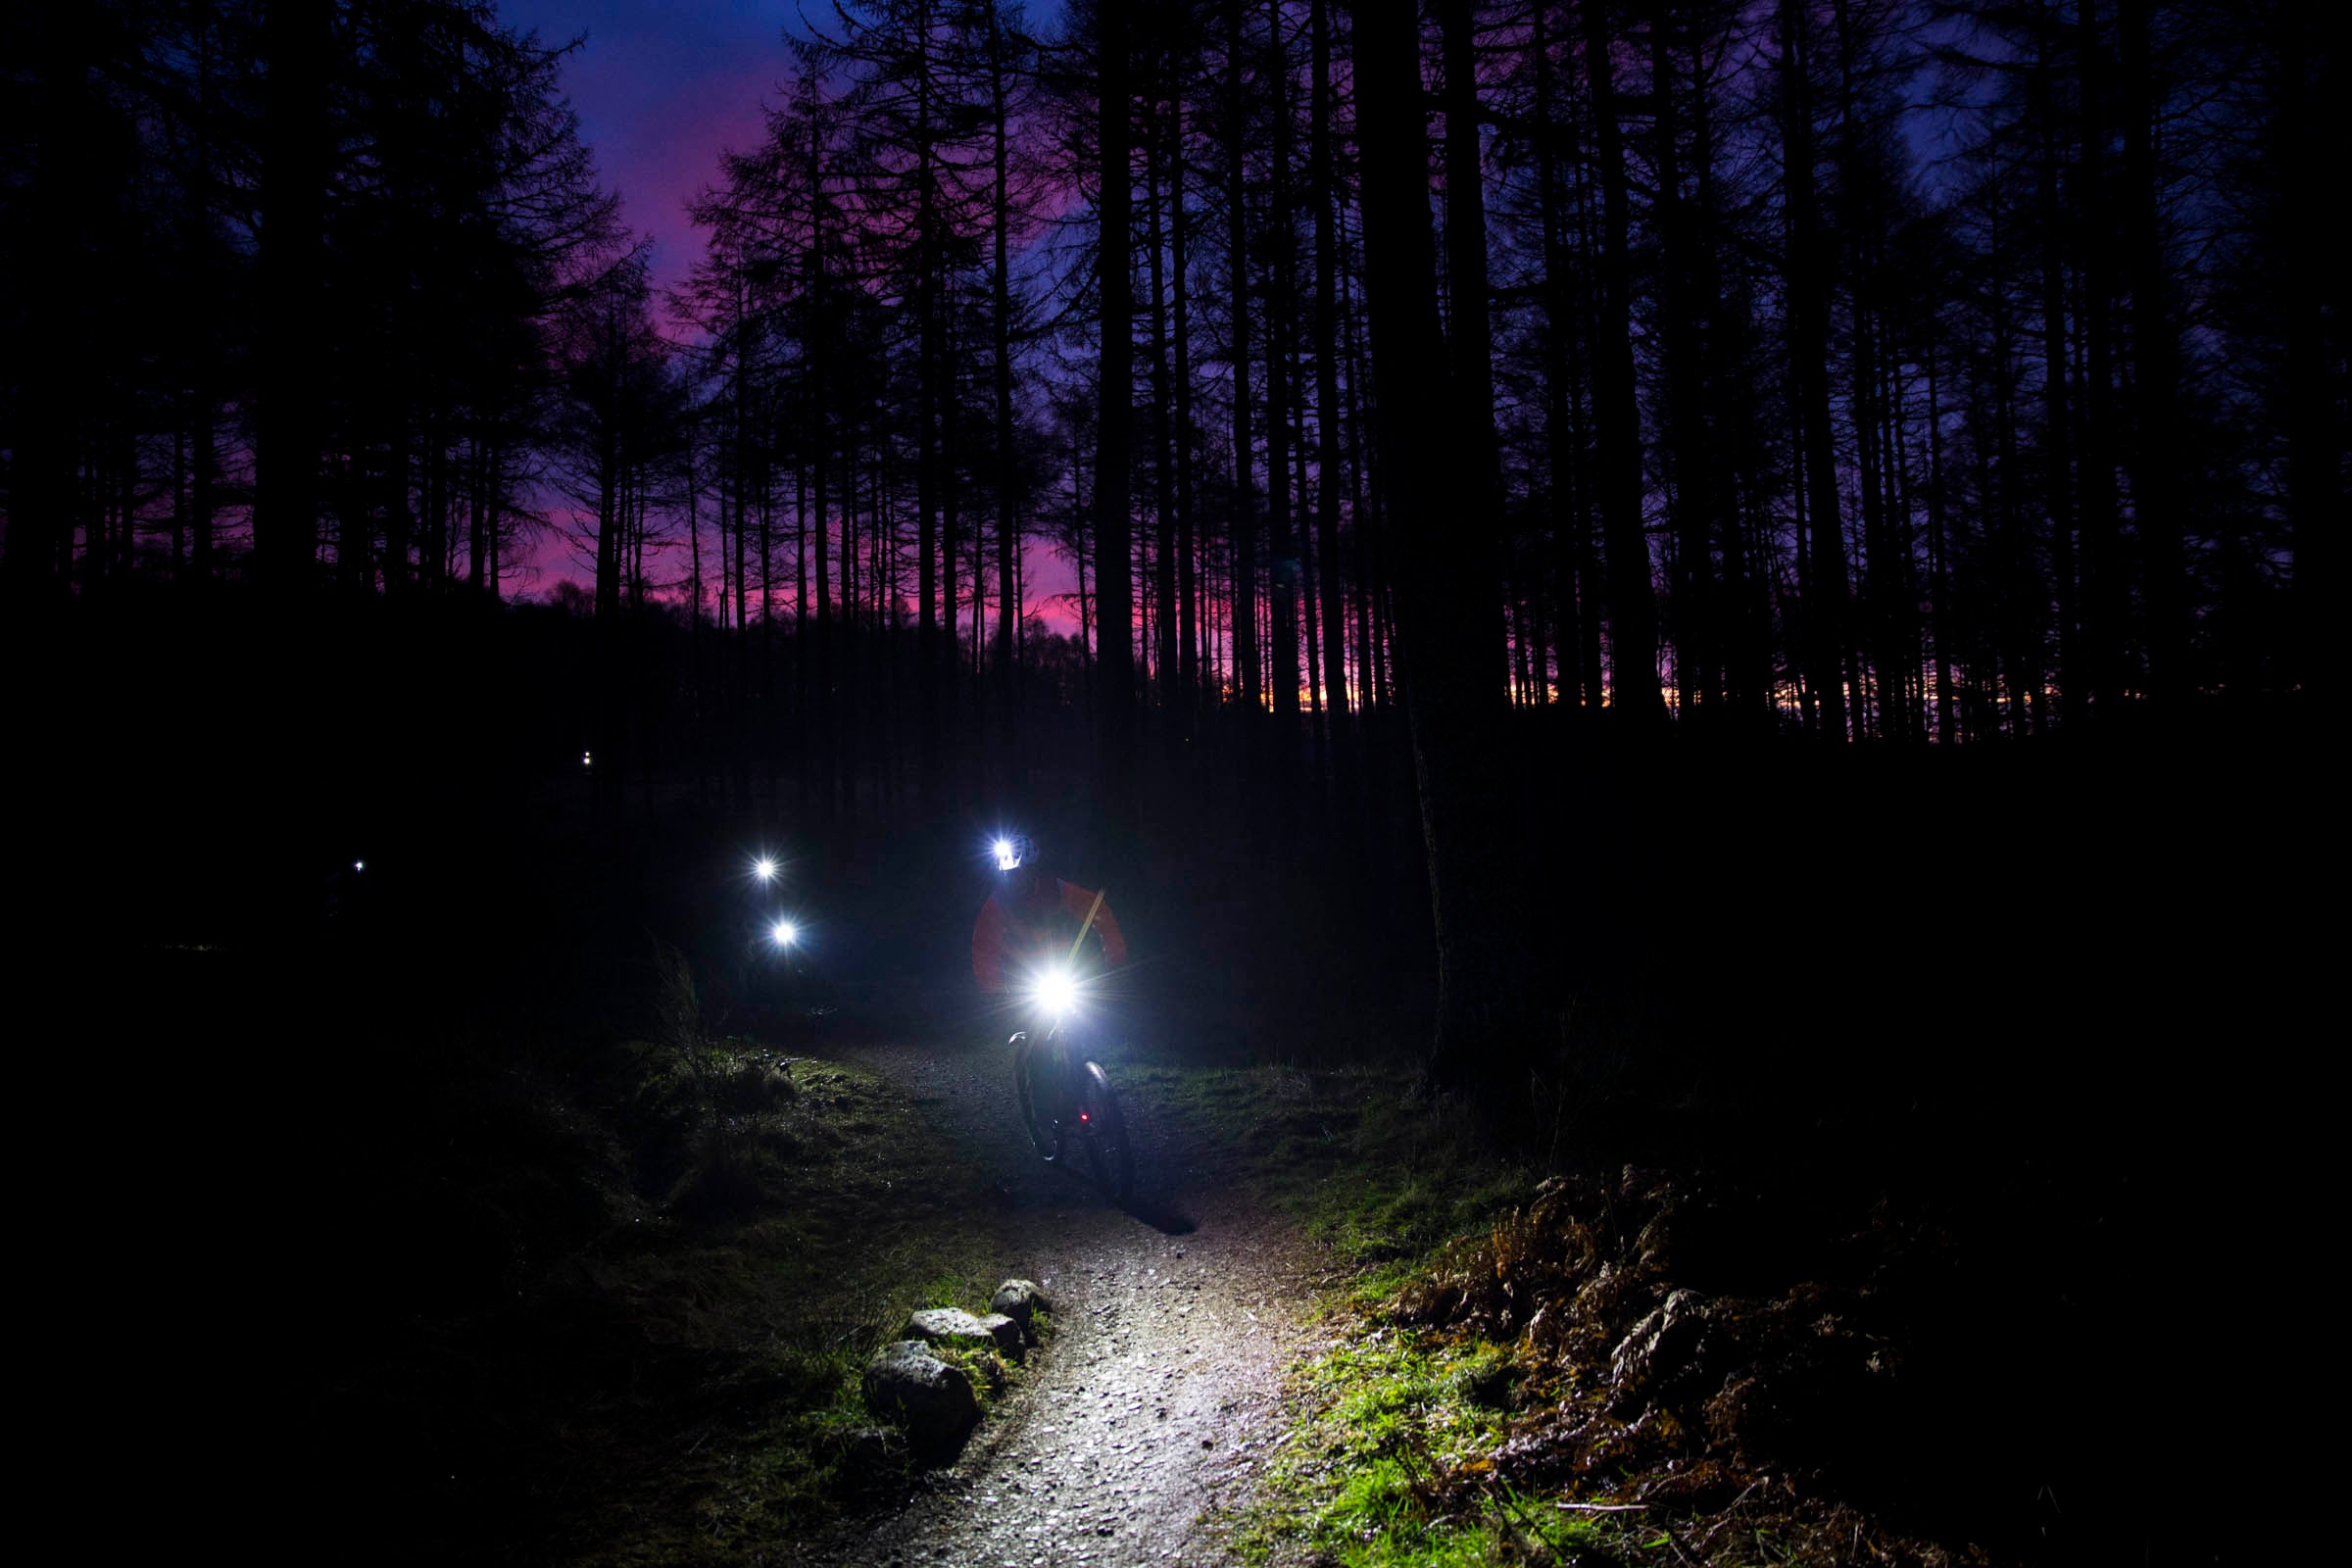 Find out why the latest bike lights will give you the confidence to ride at night